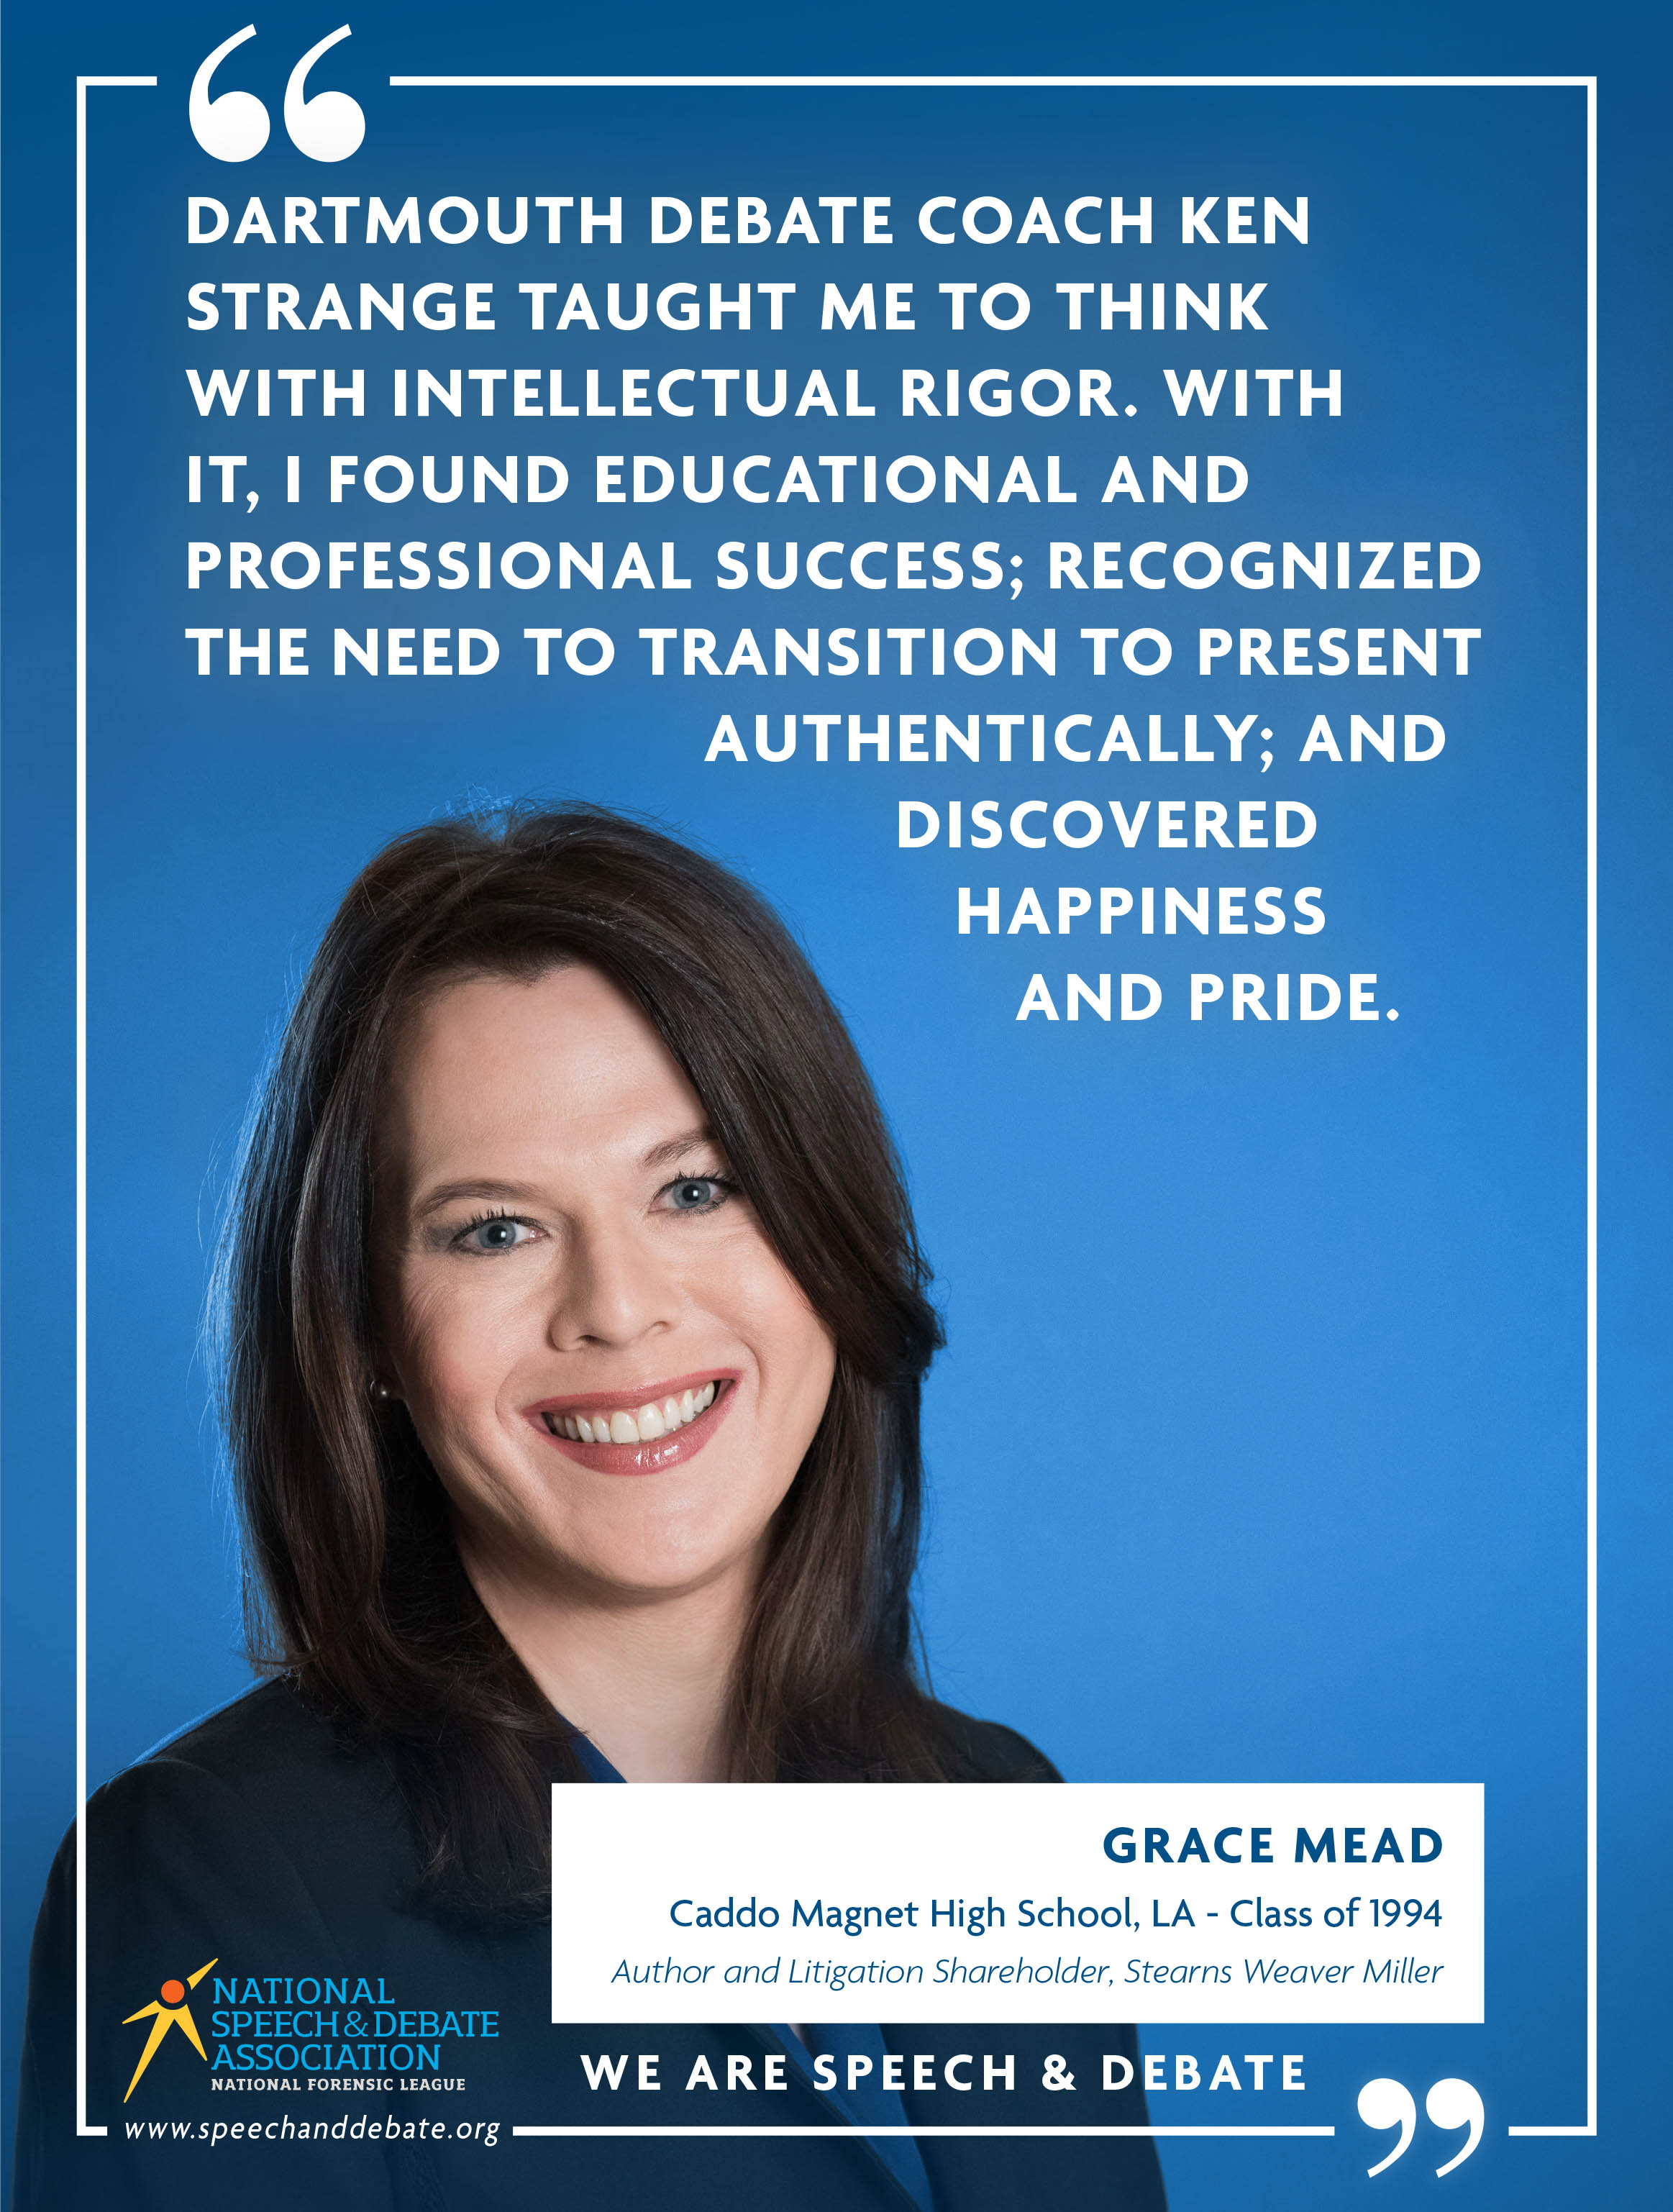 "DARTMOUTH DEBATE COACH KEN STRANGE TAUGHT ME TO THINK WITH INTELLECTUAL RIGOR. WITH IT, I FOUND EDUCATIONAL AND PROFESSIONAL SUCCESS; RECOGNIZED THE NEED TO TRANSITION TO PRESENT AUTHENTICALLY; AND DISCOVERED HAPPINESS AND PRIDE." - Grace Mead